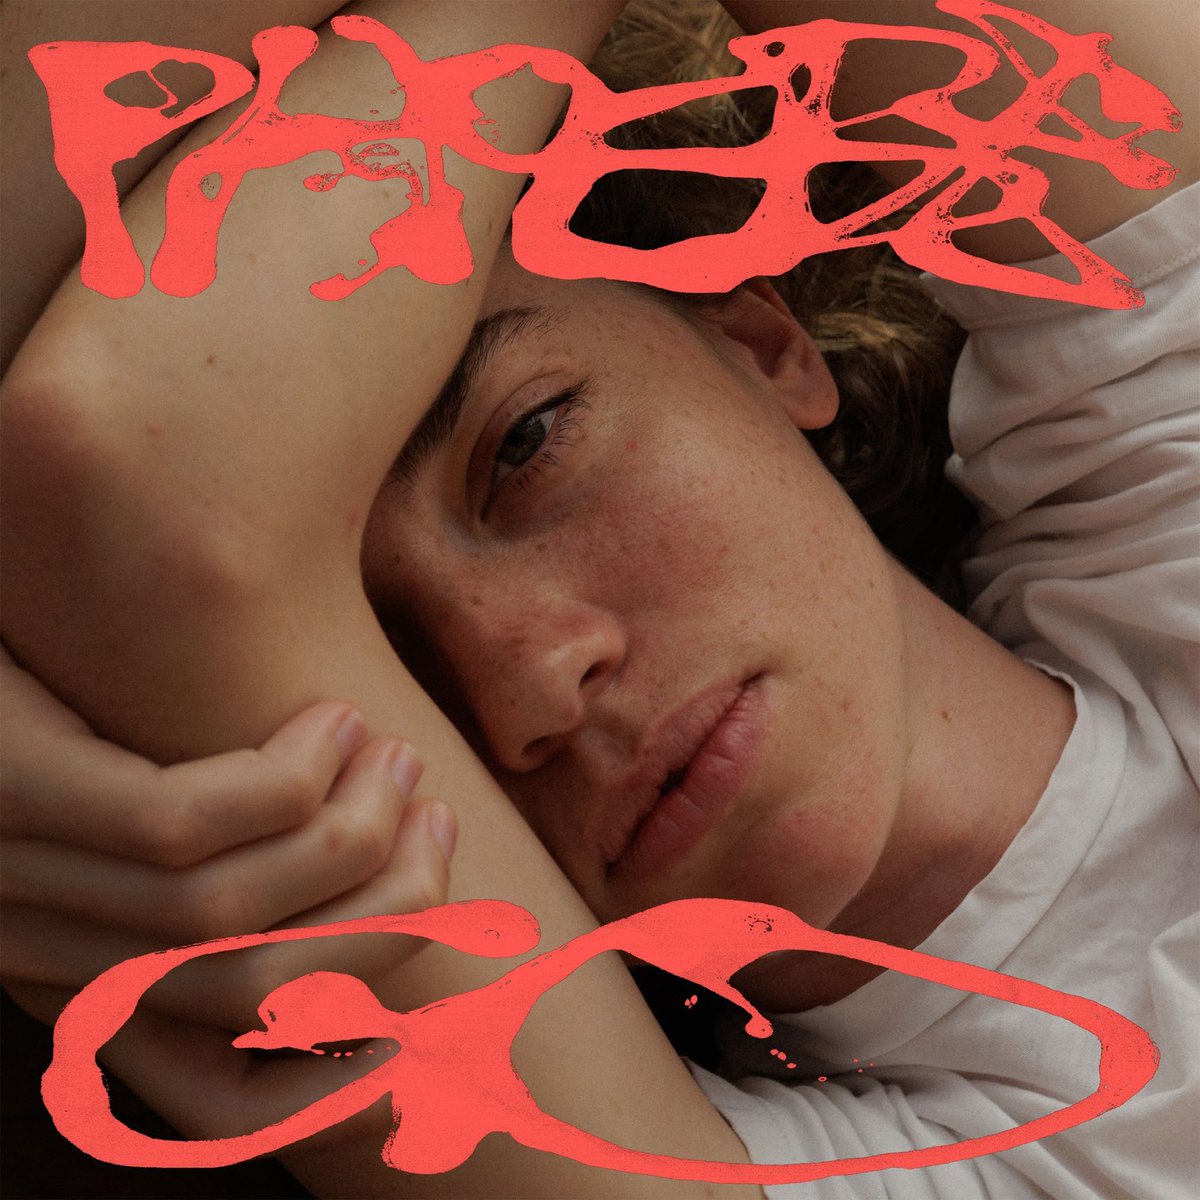 Some new music to assuage yer ears: ICYMI: Phoebe Go released her new album Marmalade on May 17, read Gareth O'Malley's review northerntransmissions.com/phoebe-go-marm… #NewMusic